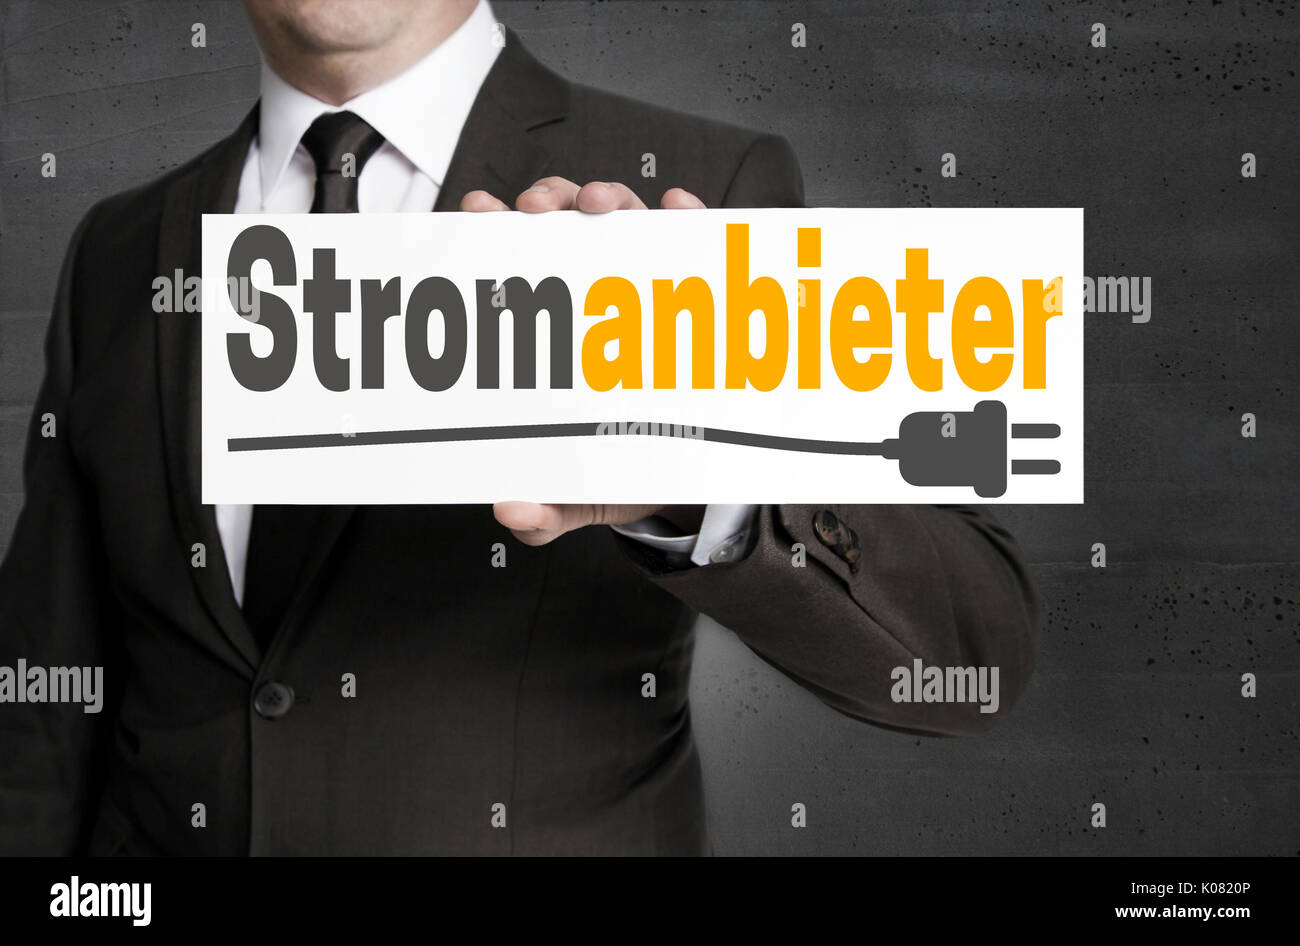 Stromanbieter (in german Electricity provider) sign is held by businessman. Stock Photo